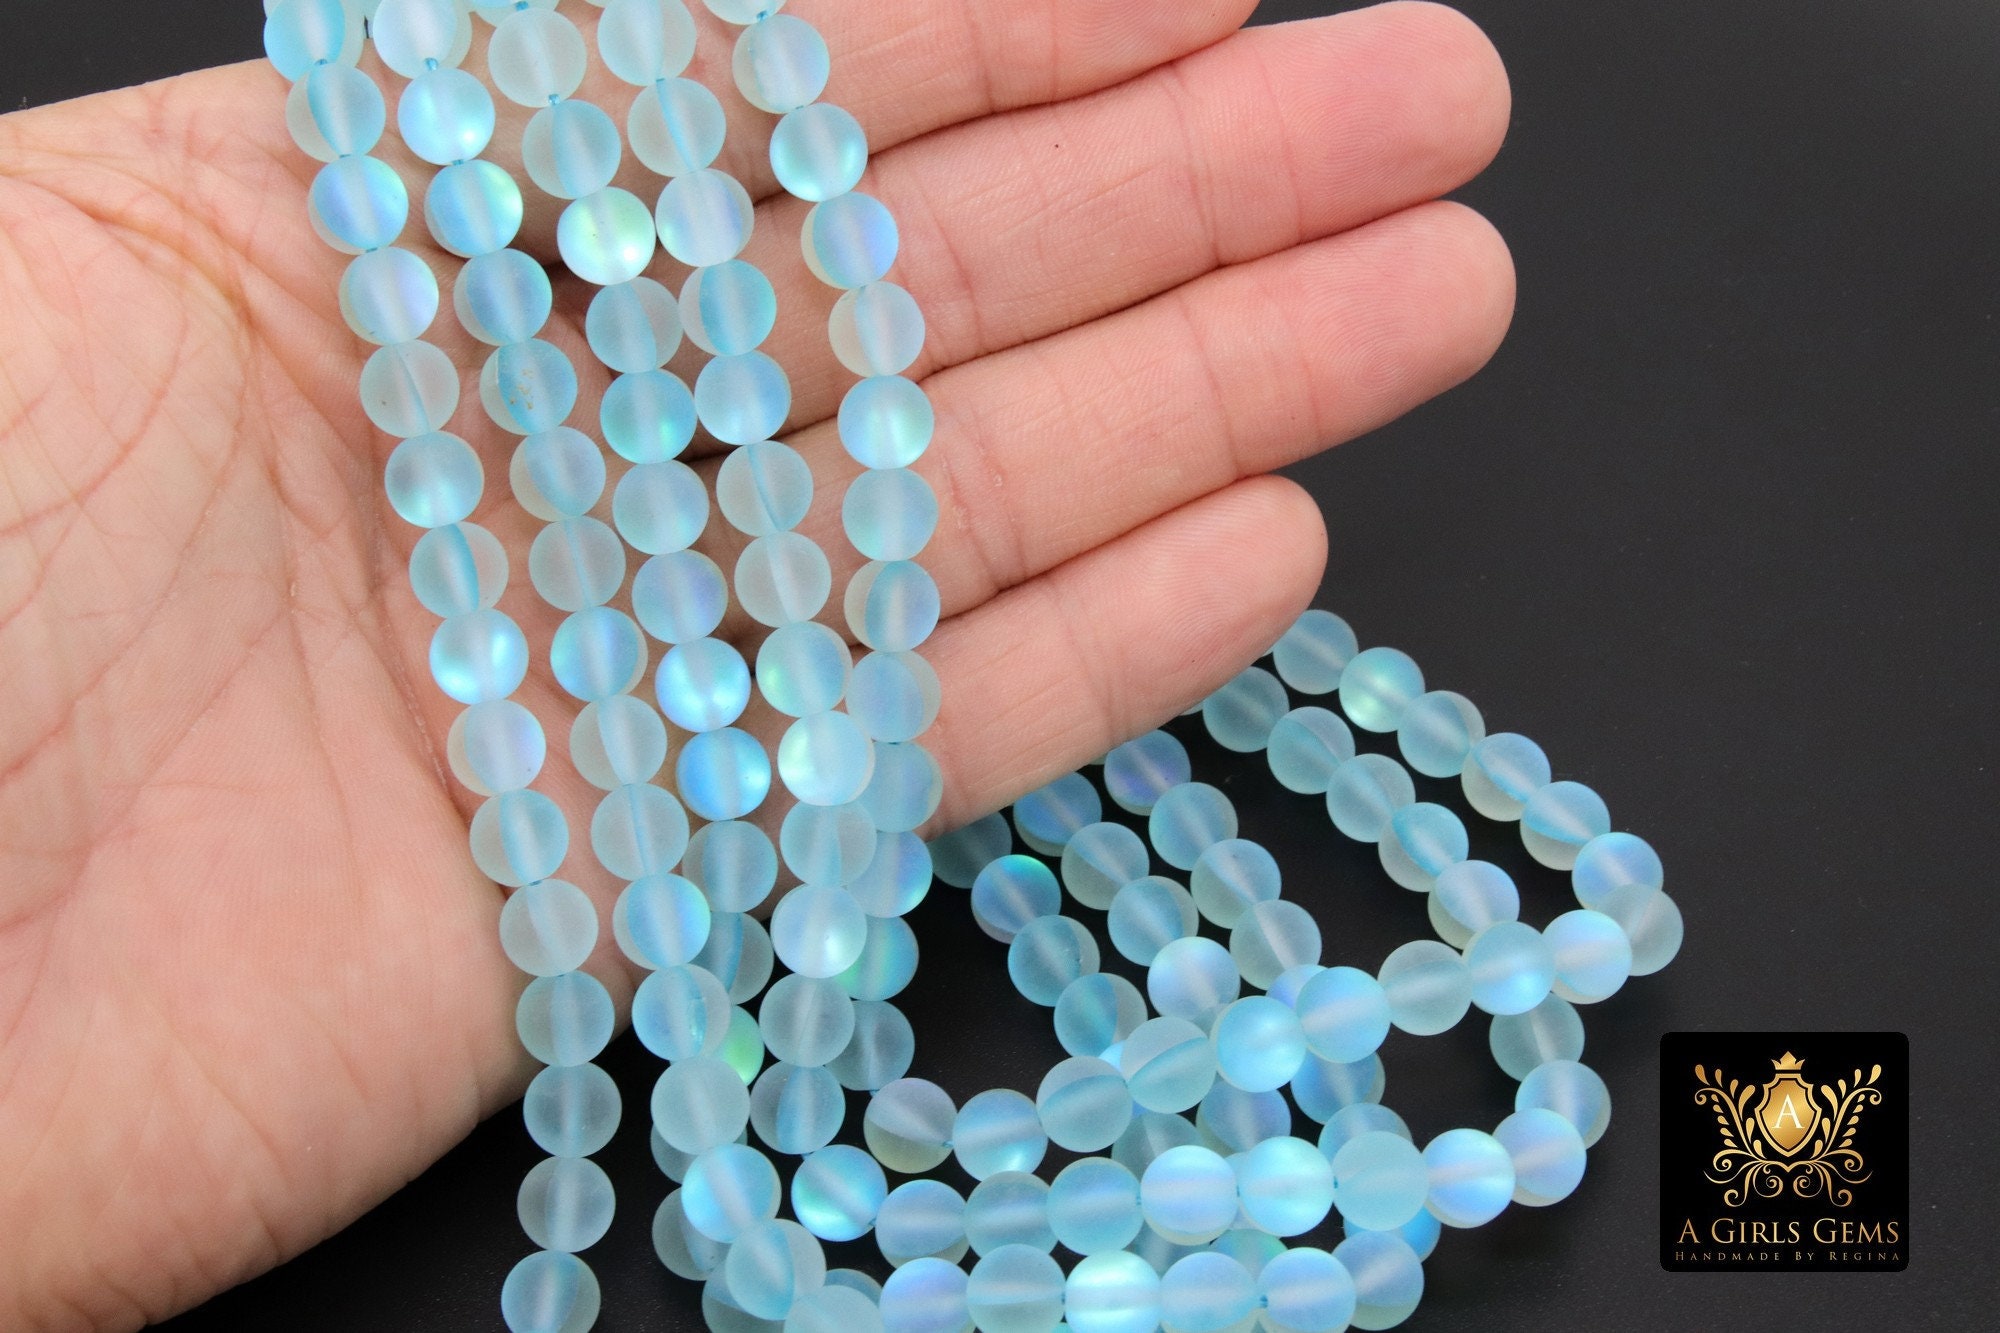 Gray Baby Blue AB Beads, Frosted Aqua Iridescent Beads BS #114, sizes in 8  mm 15.25 inch FULL Strands